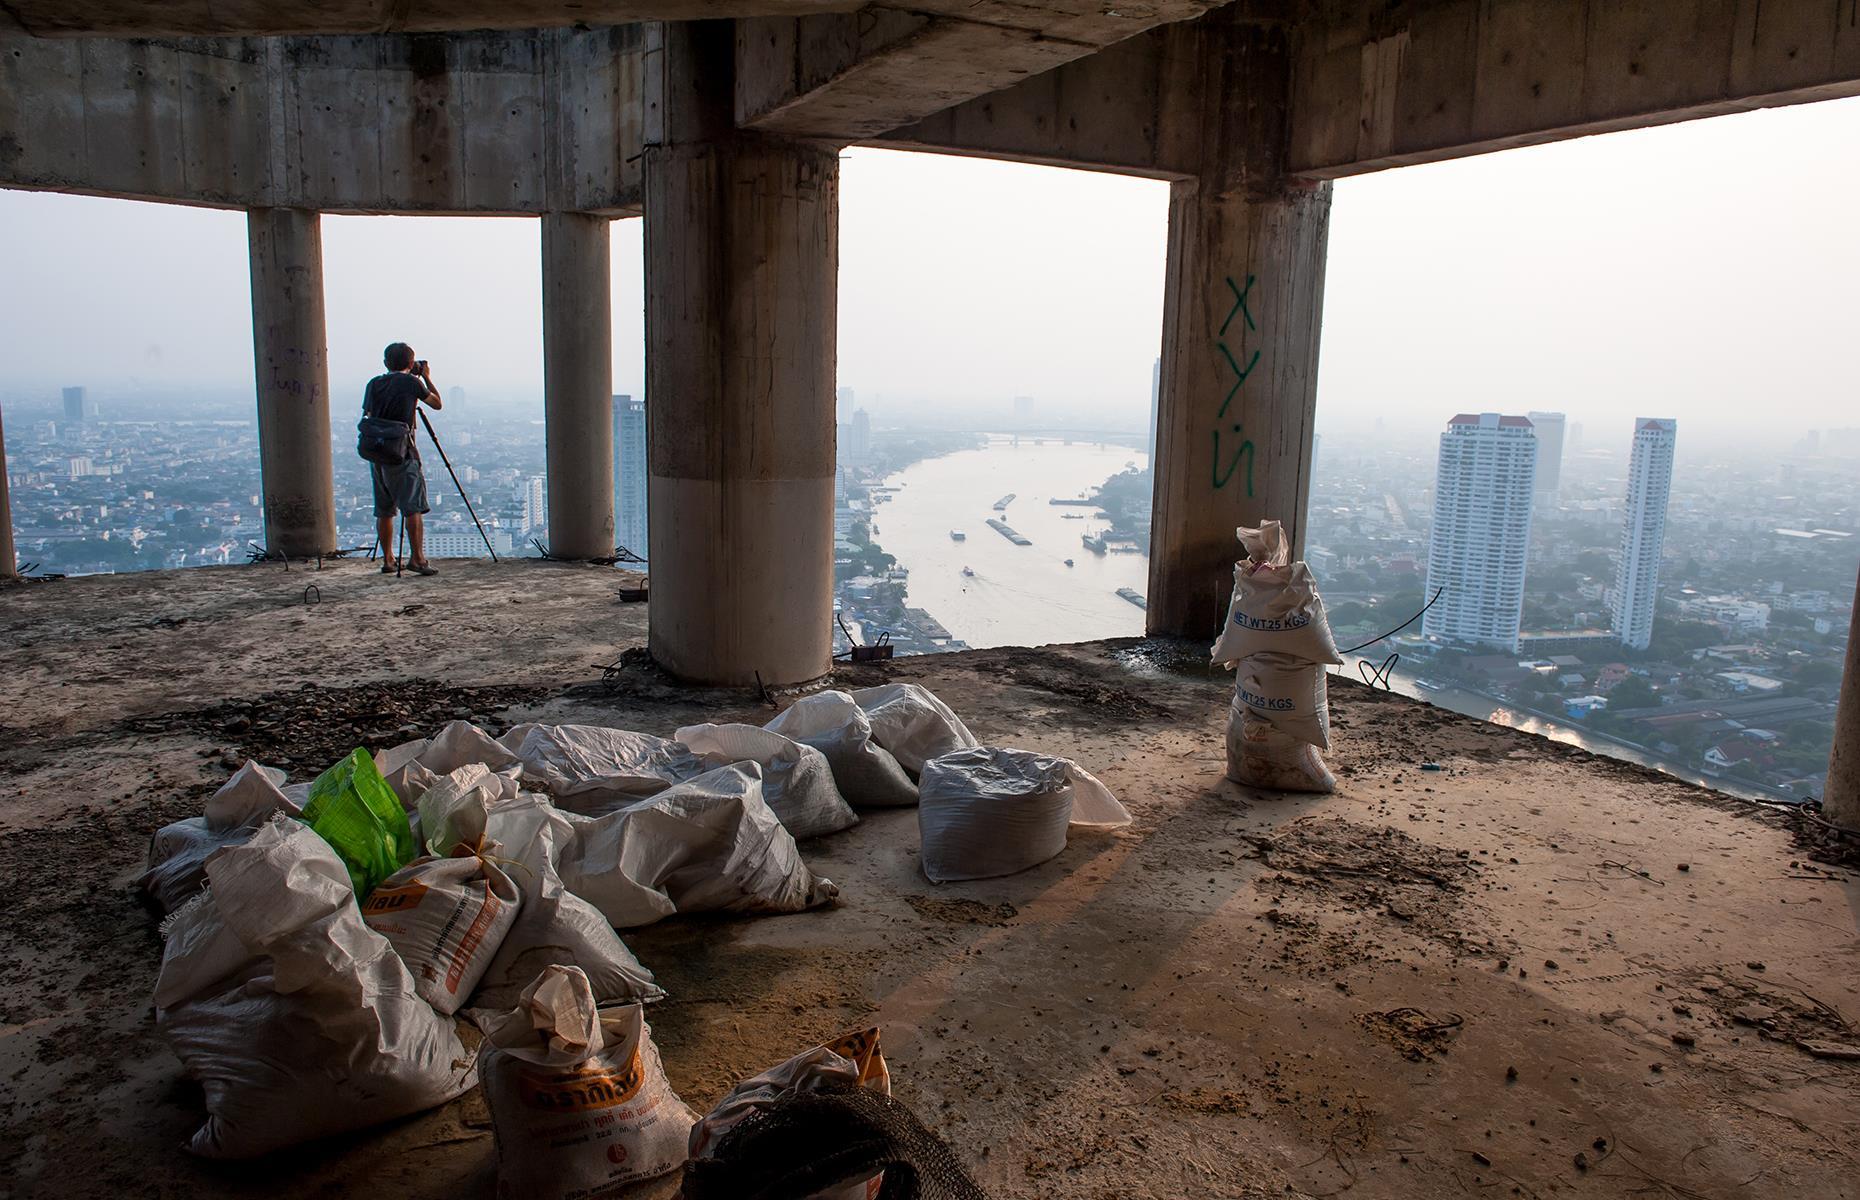 Abandoned sites of the world's wealthiest cities